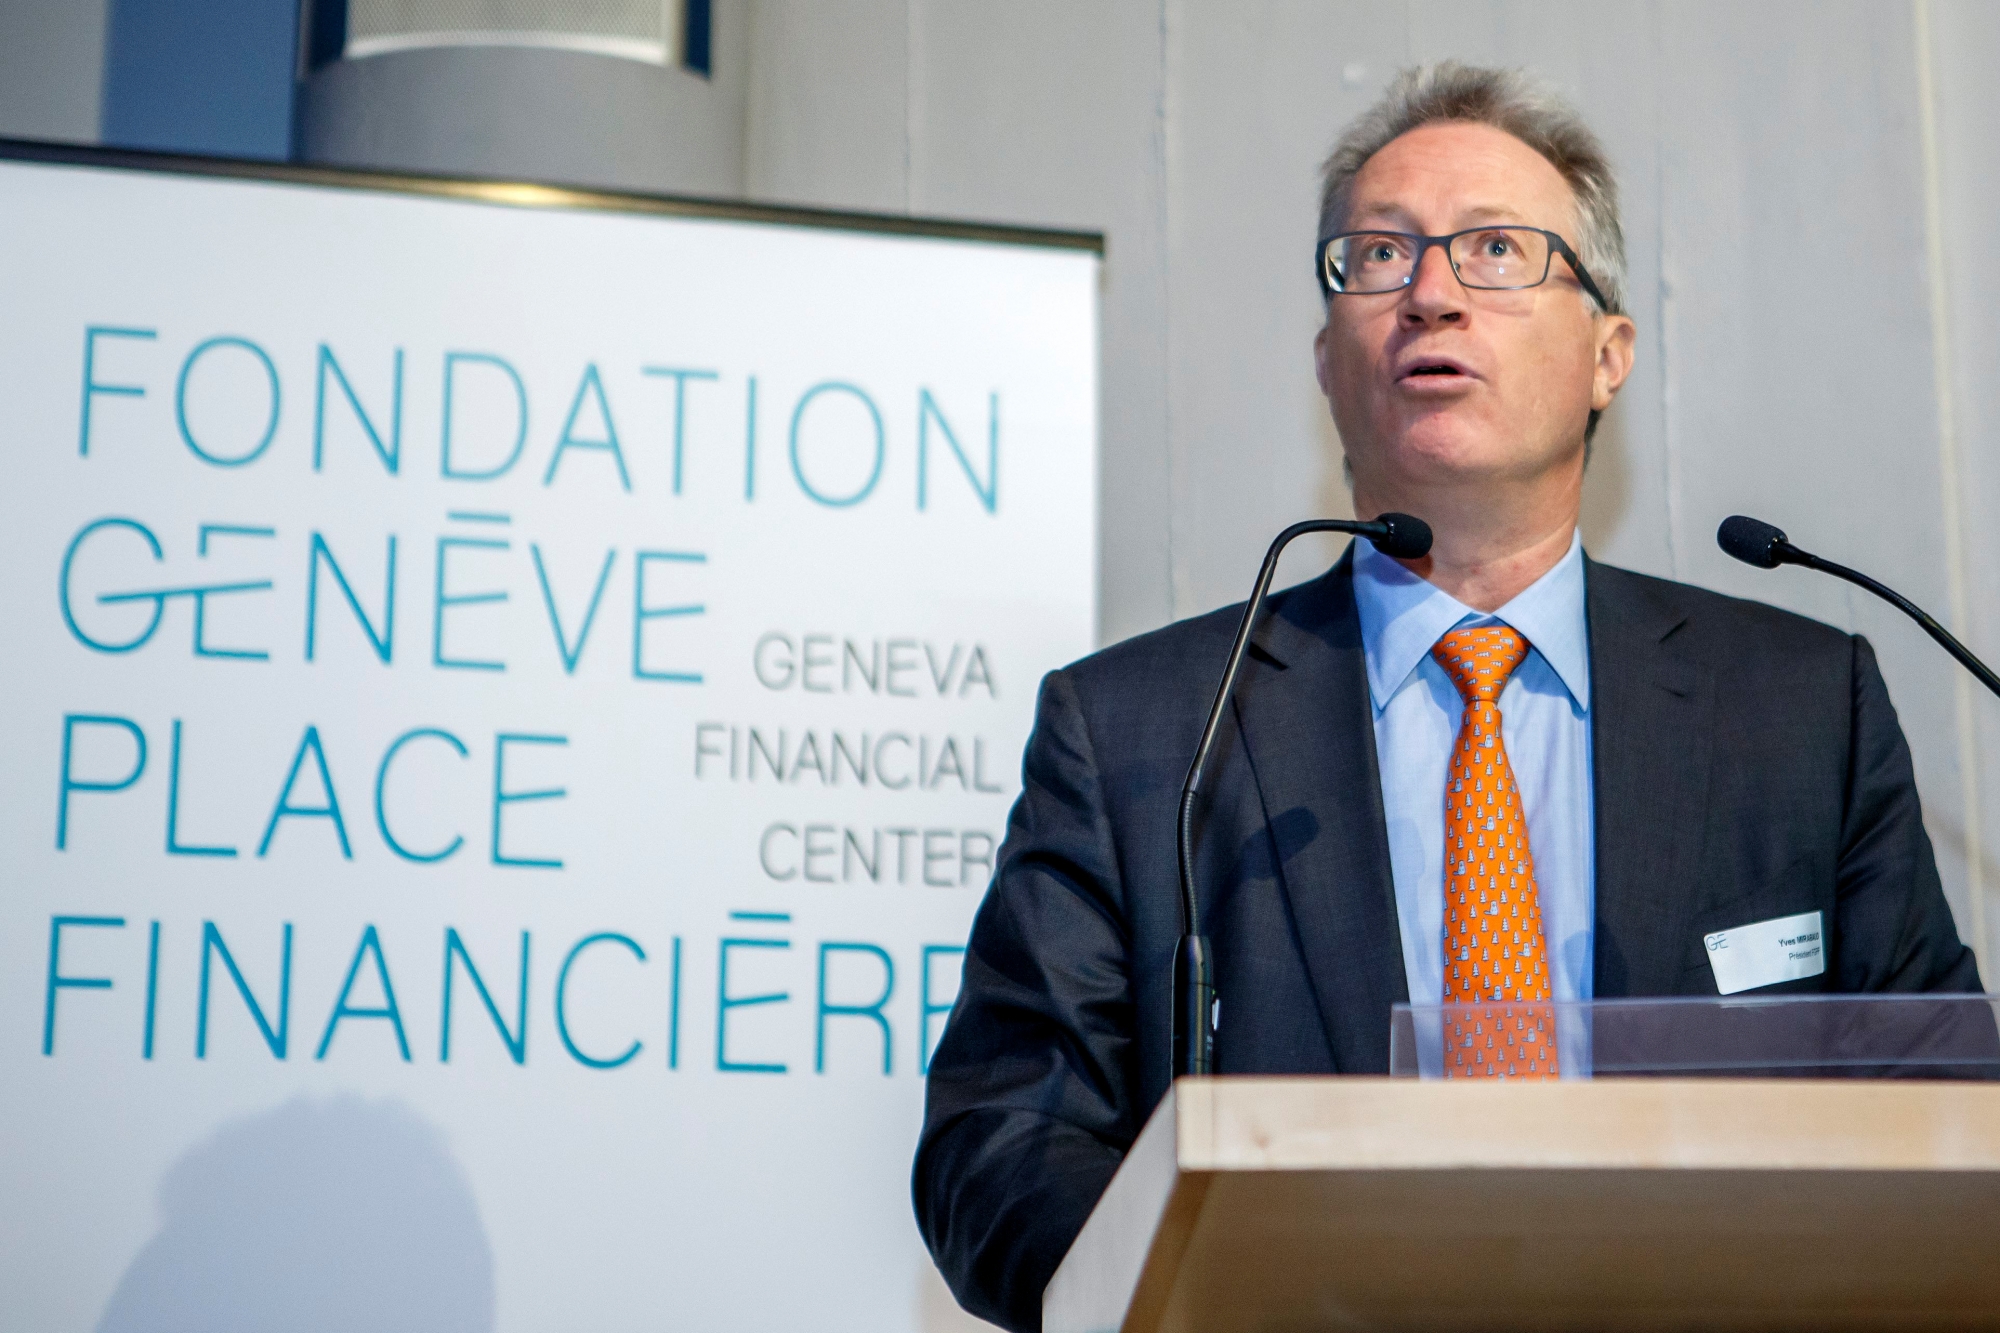 Yves Mirabaud, President of Fondation Geneve Place Financiere - Geneva Financial Center, presents the results of the economic survey 2017 - 2018 of the Geneva's financial place, during a press conference, in Geneva, Switzerland, Tuesday, October 10, 2017. (KEYSTONE/Salvatore Di Nolfi) SWITZERLAND FONDATION GENEVE PLACE FINANCIERE